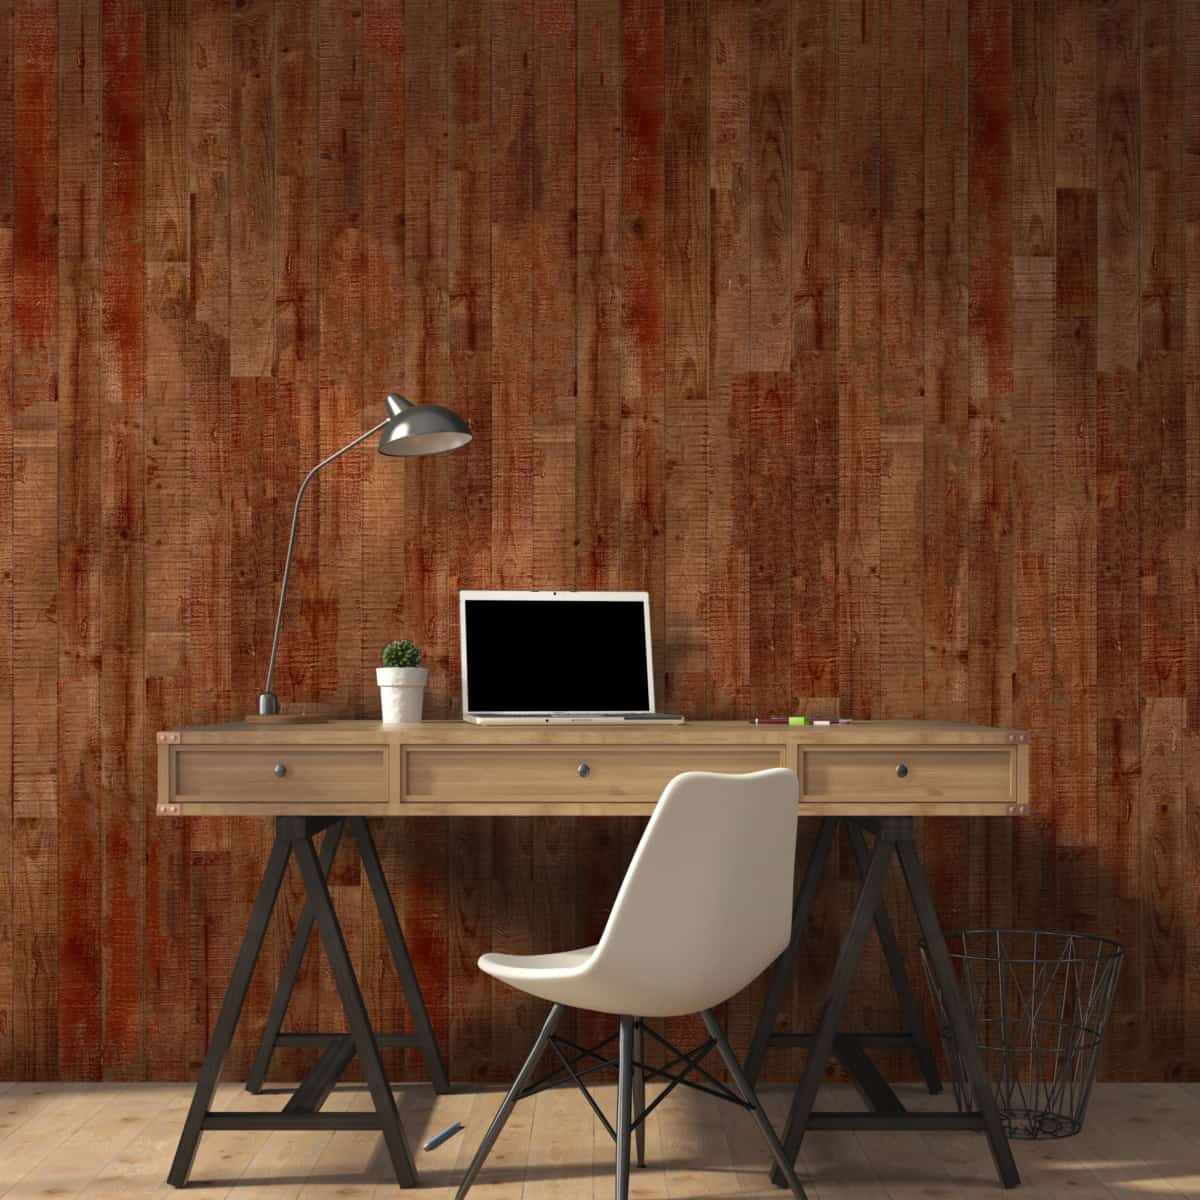 Wooden desk and modern chair against a gray wall